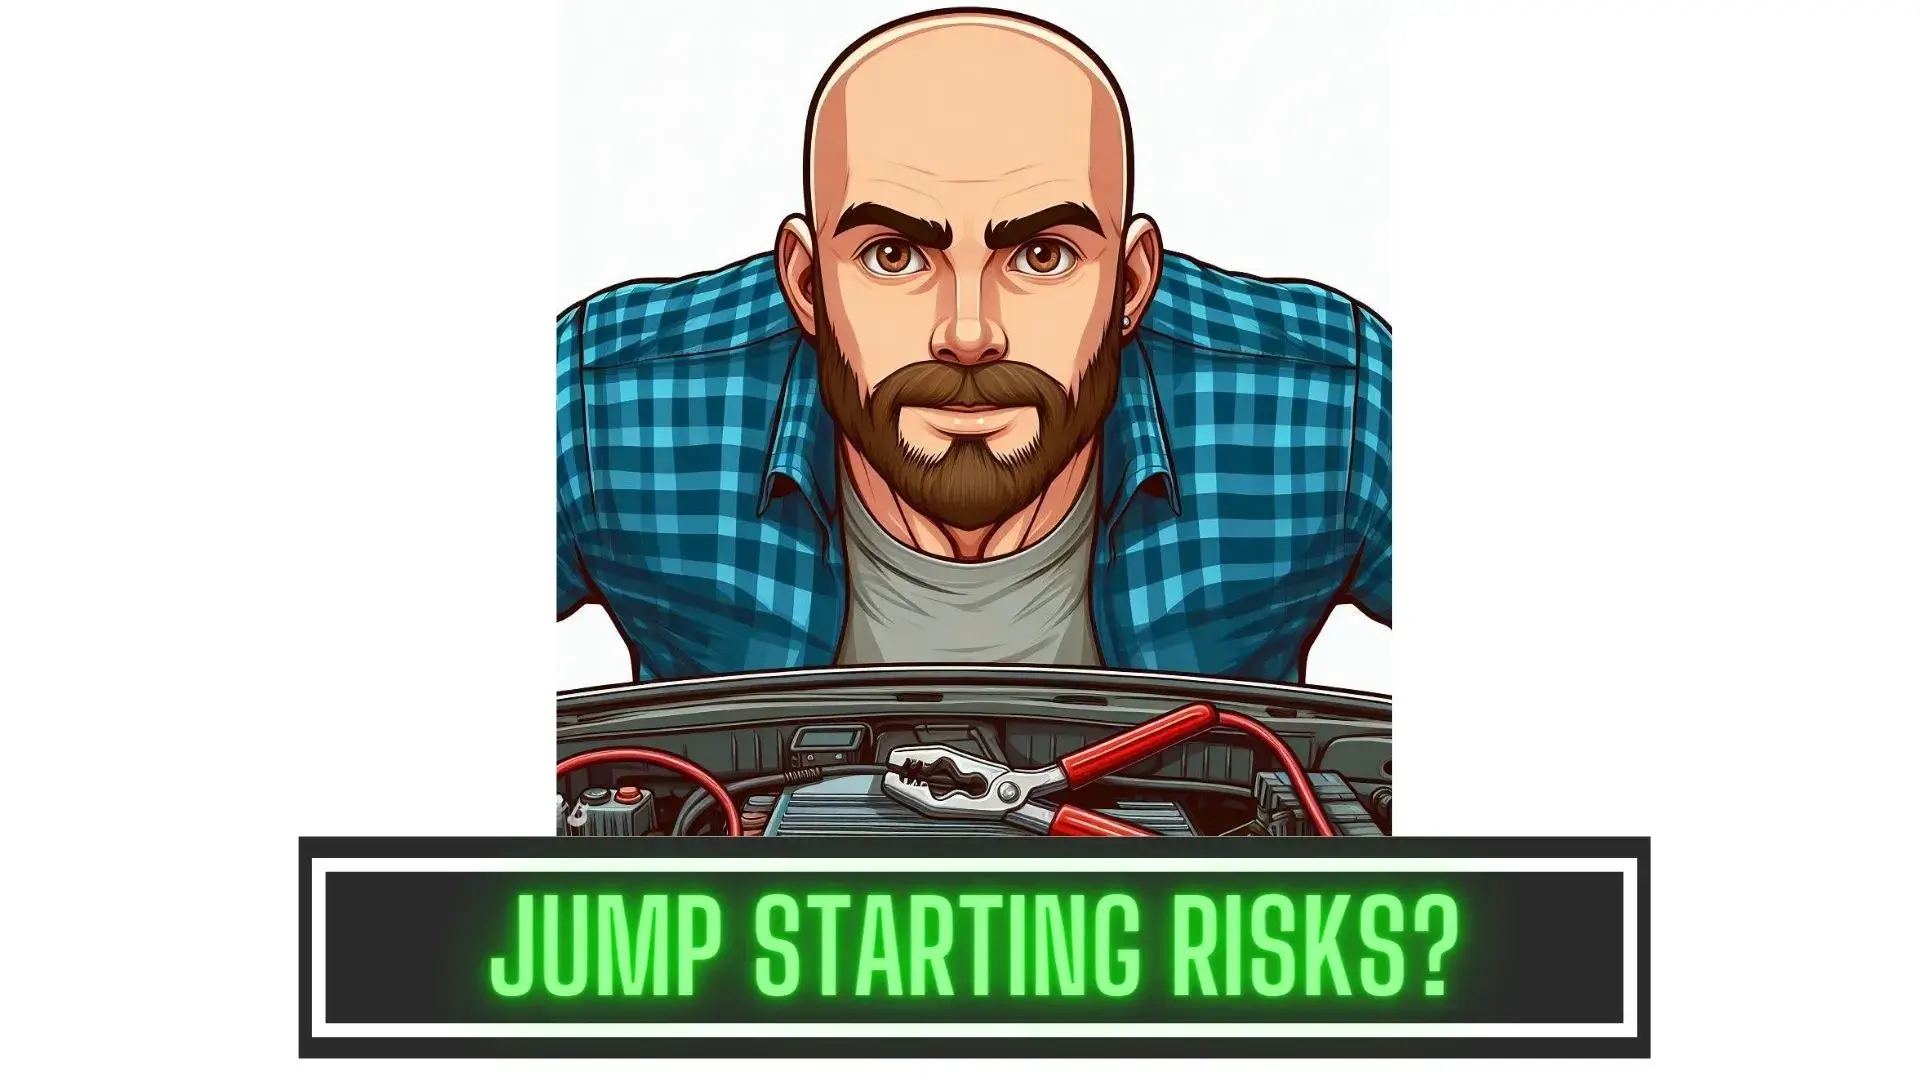 Risks of Jump Starting a Vehicle